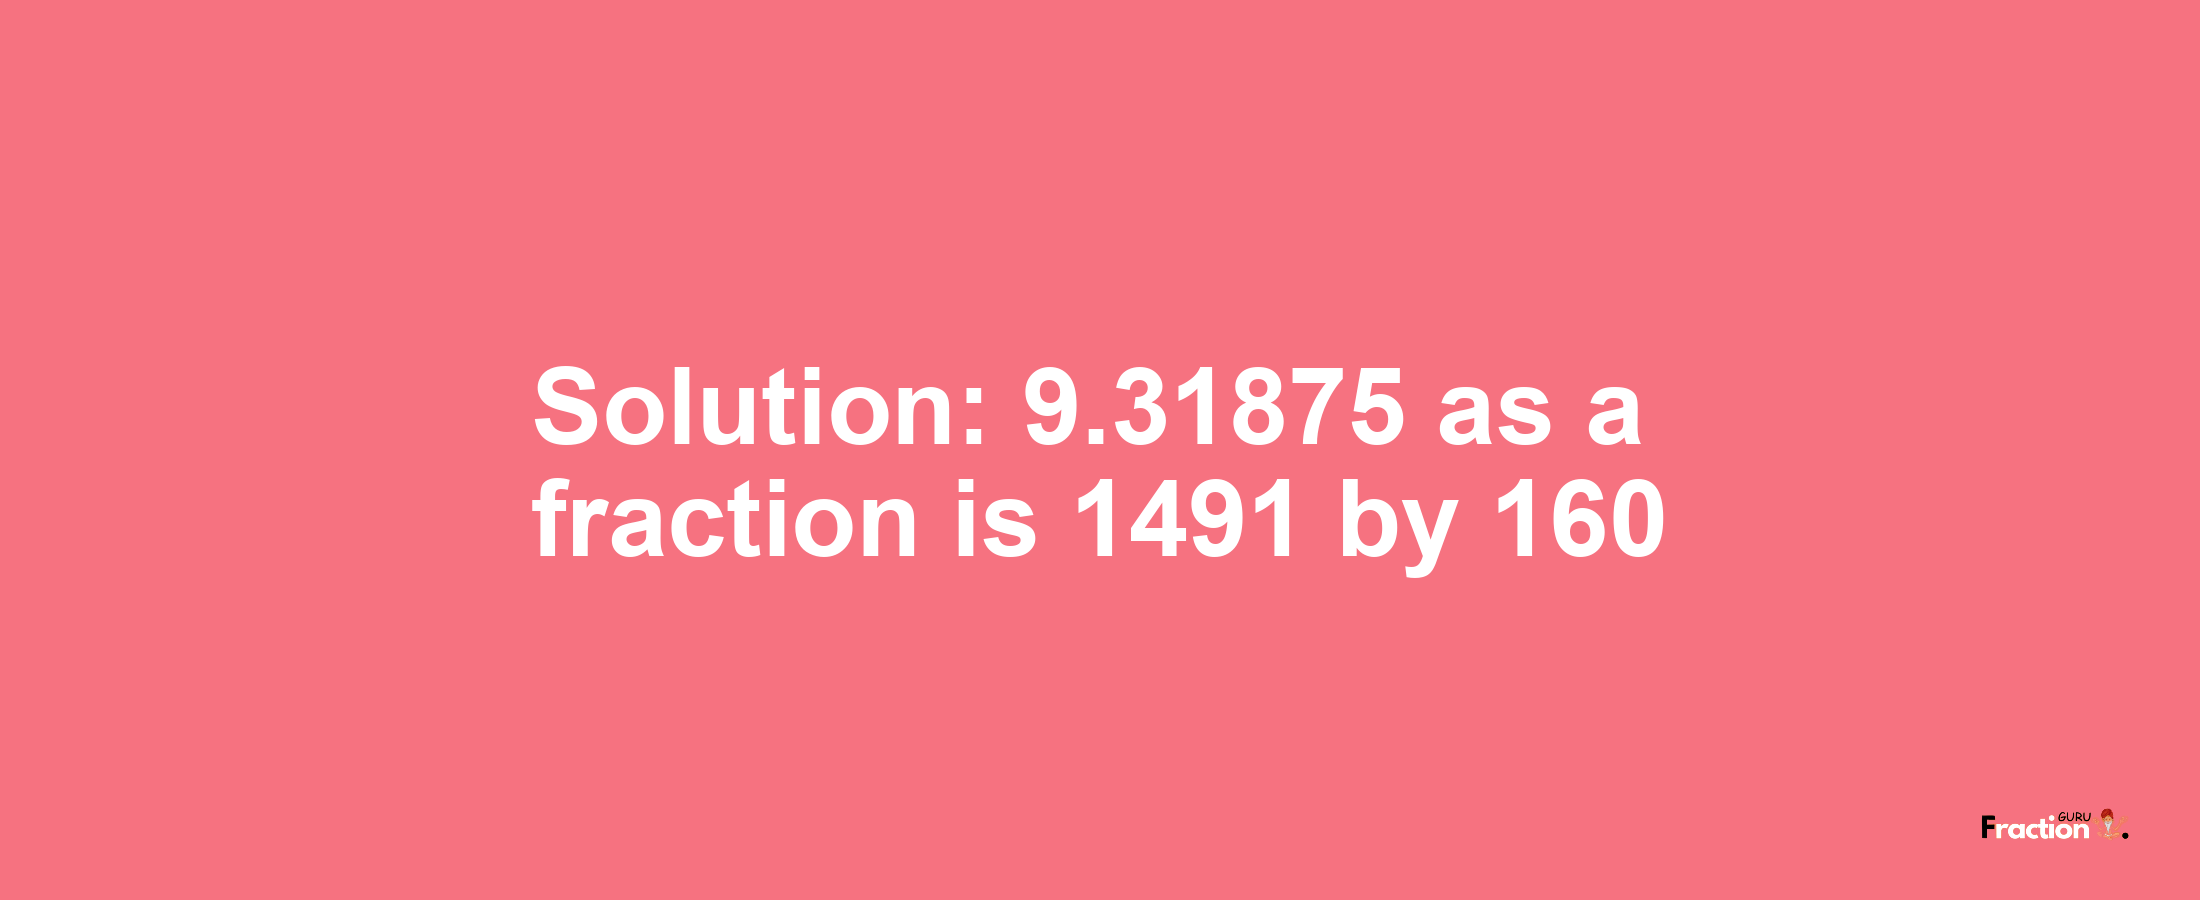 Solution:9.31875 as a fraction is 1491/160